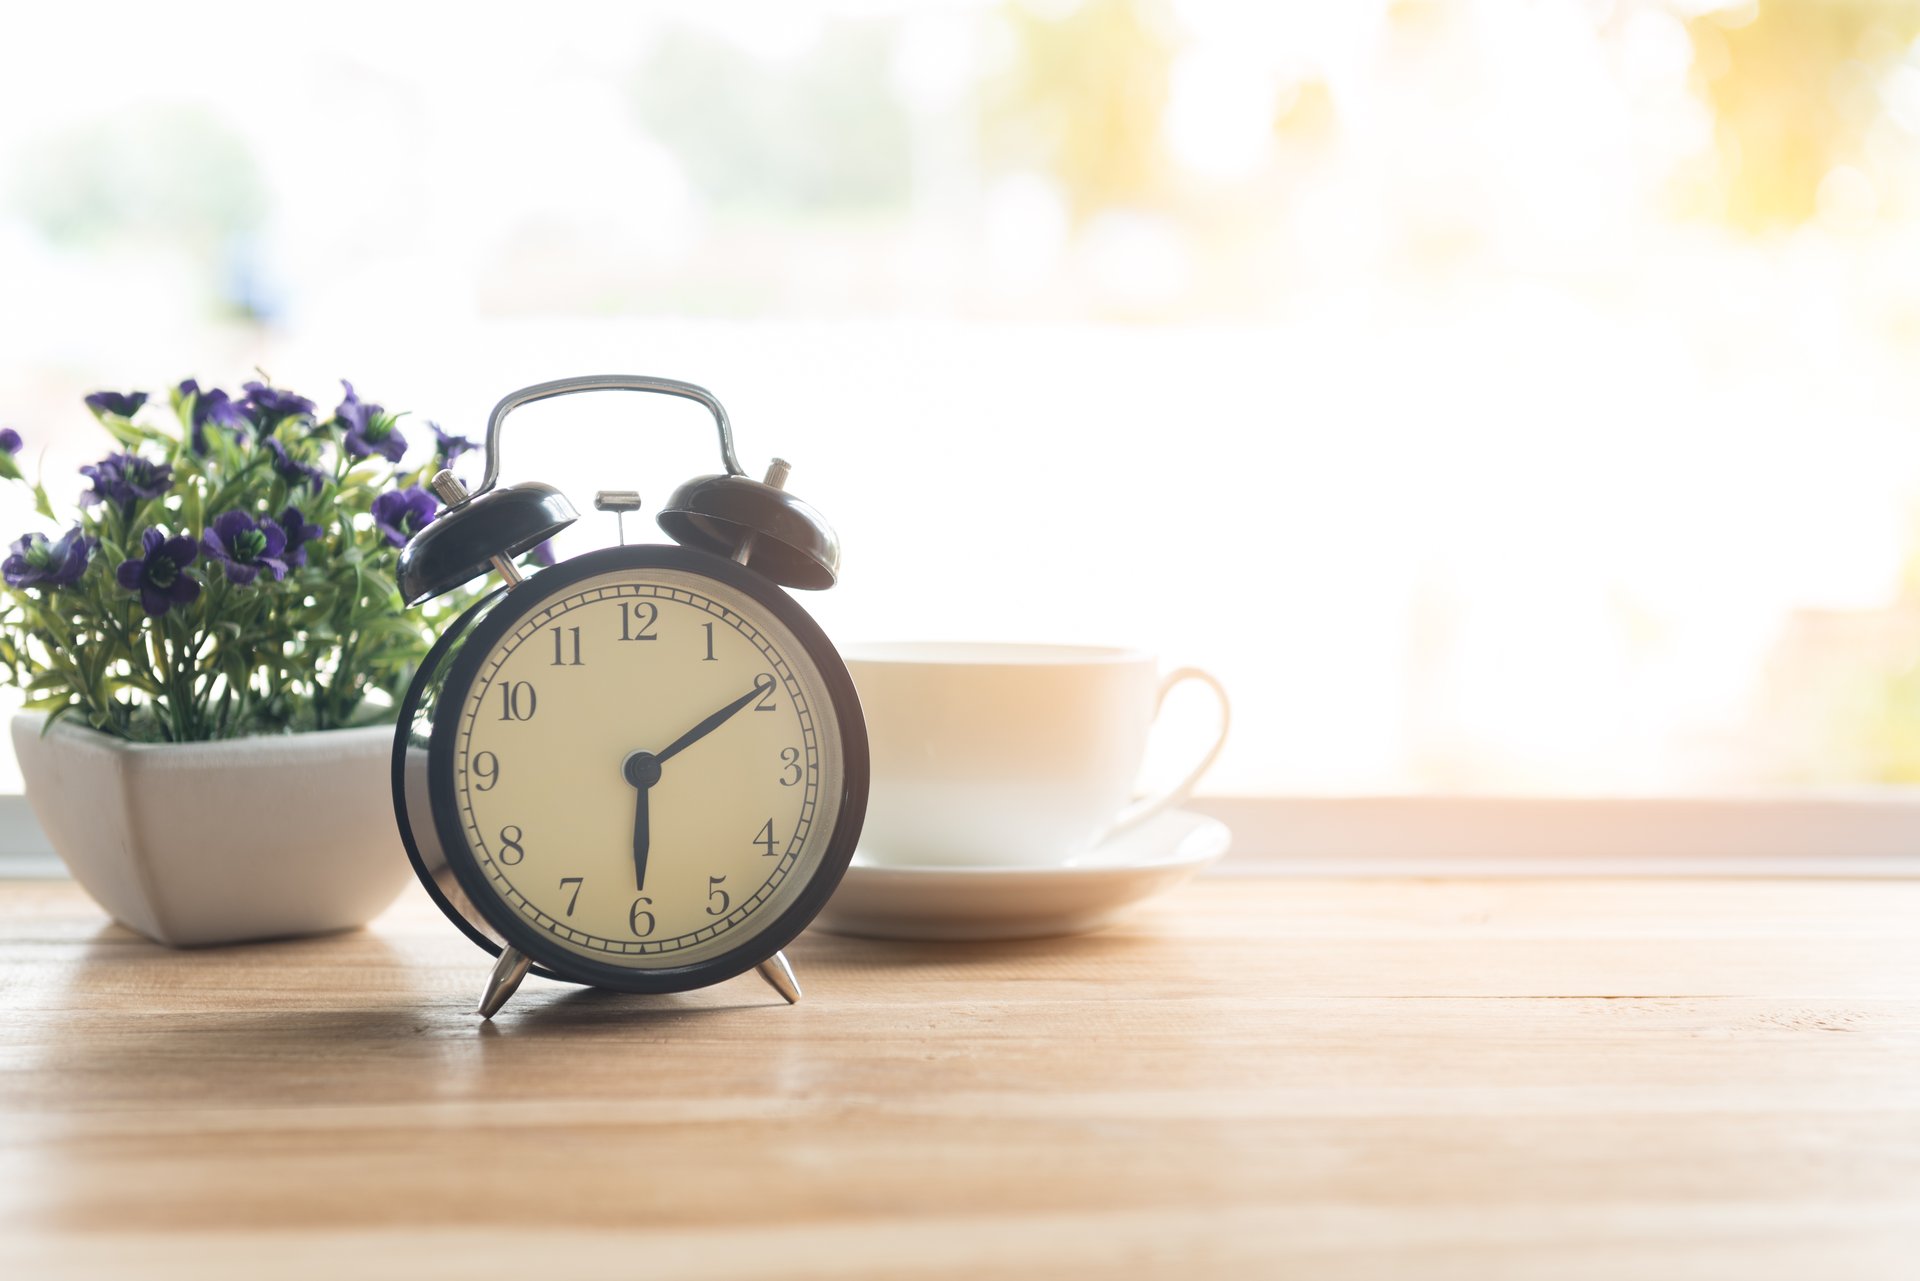 An alarm clock sits next to a plant and a cup of coffee